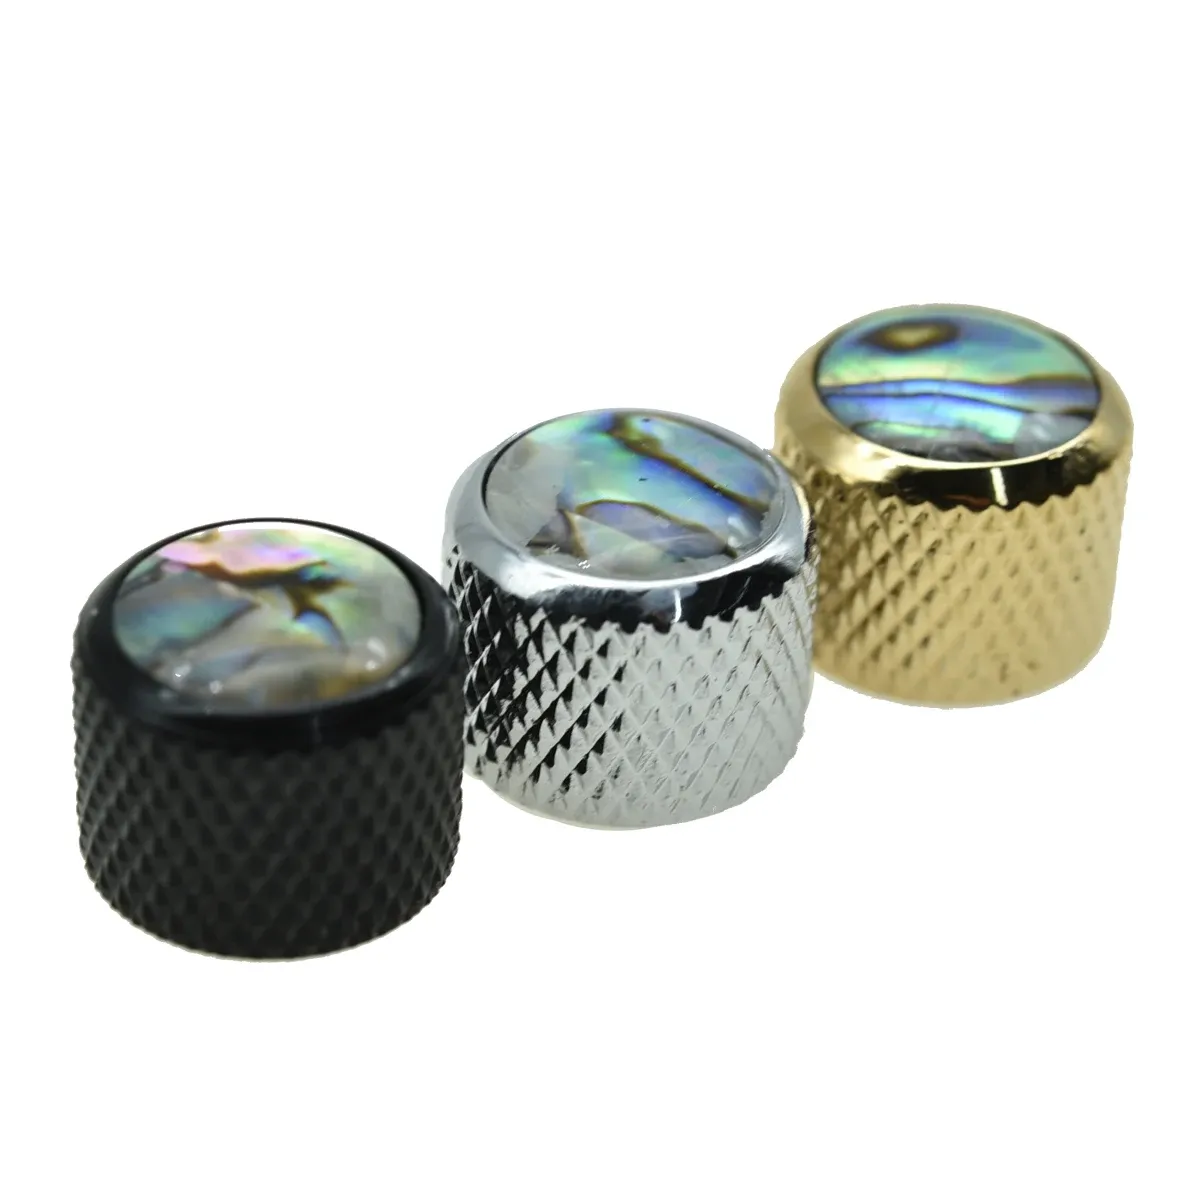 Guitar Large Size Set of 2 Push on Fit Abalone Top Dome Knobs Abalone Inserts Guitar Bass Knobs for Import Precision Bass/TL Guitar